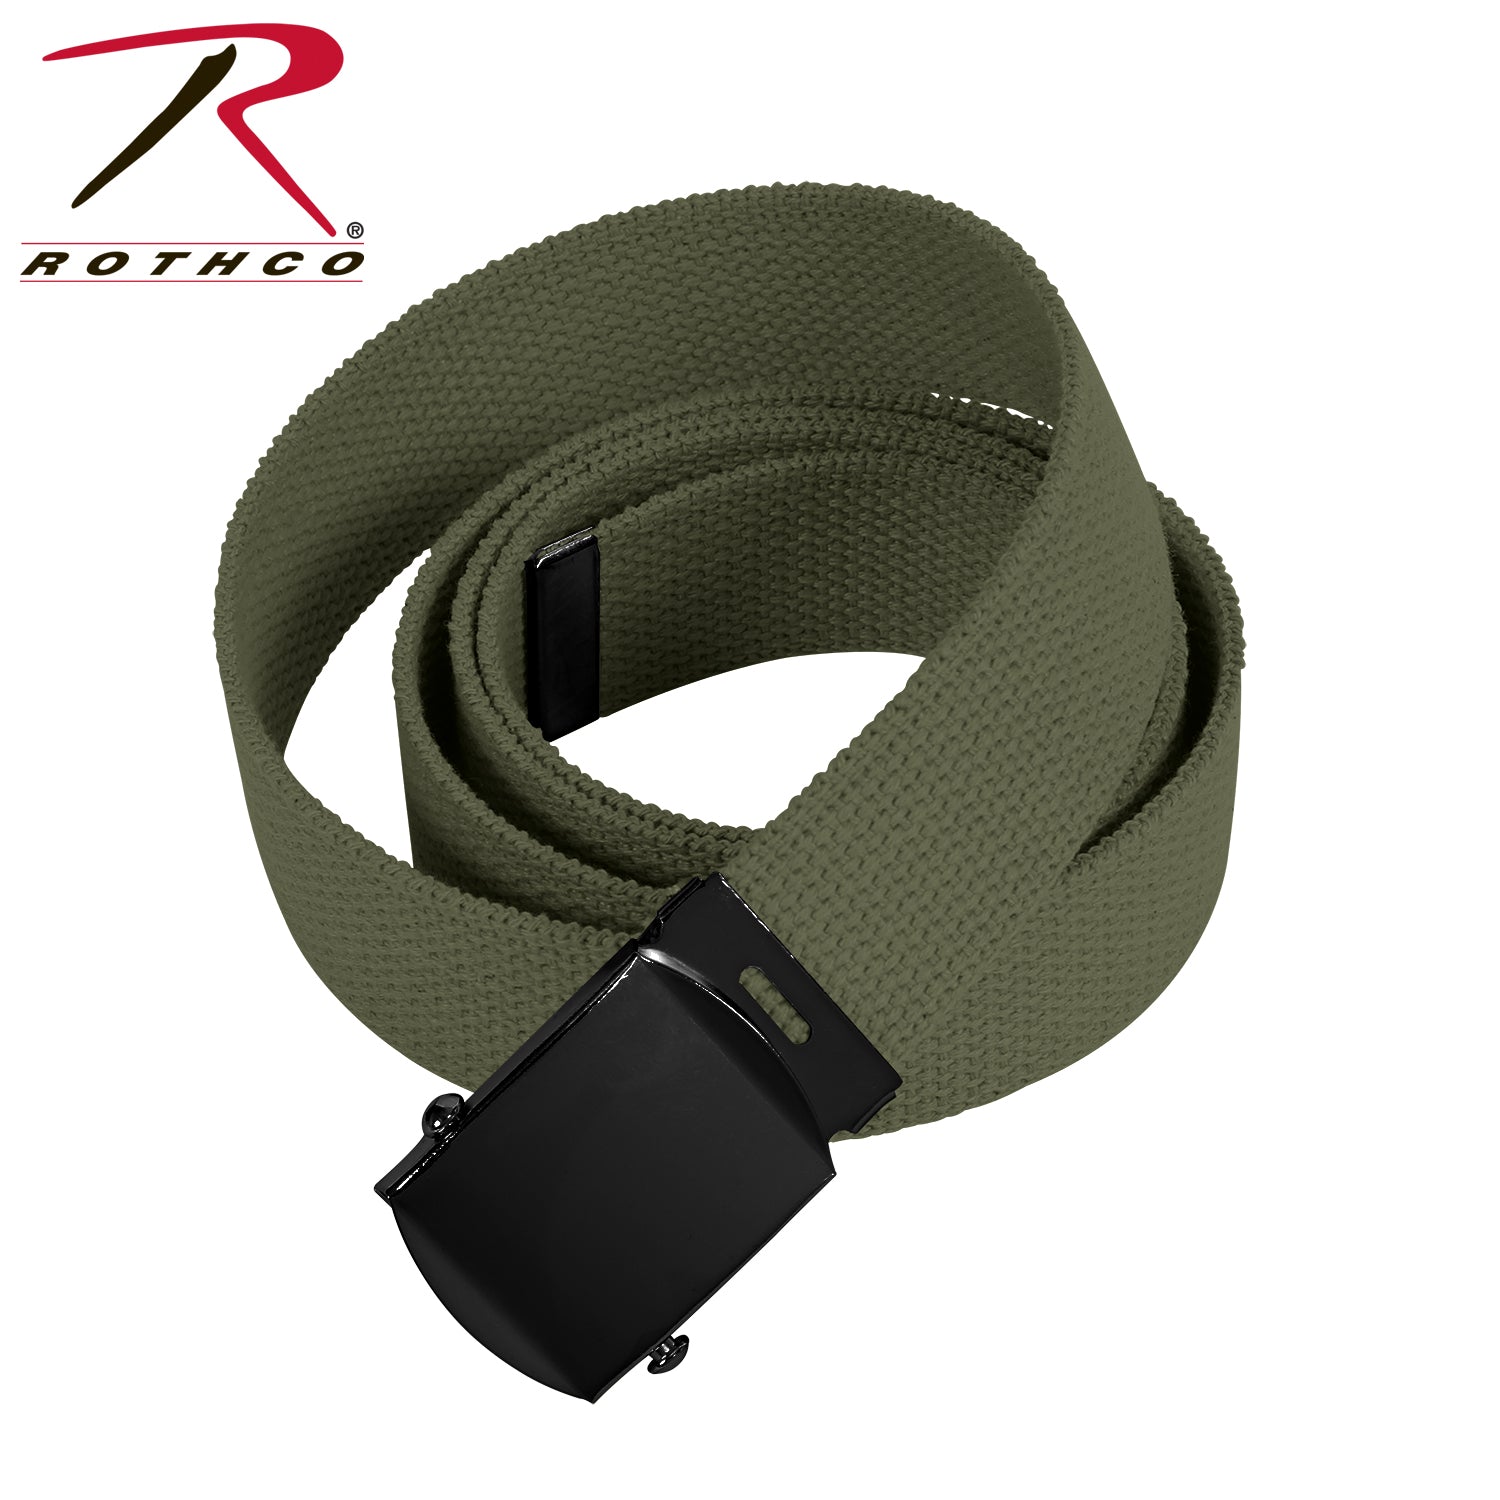 Rothco Web Belts With Buckle - Tactical Choice Plus